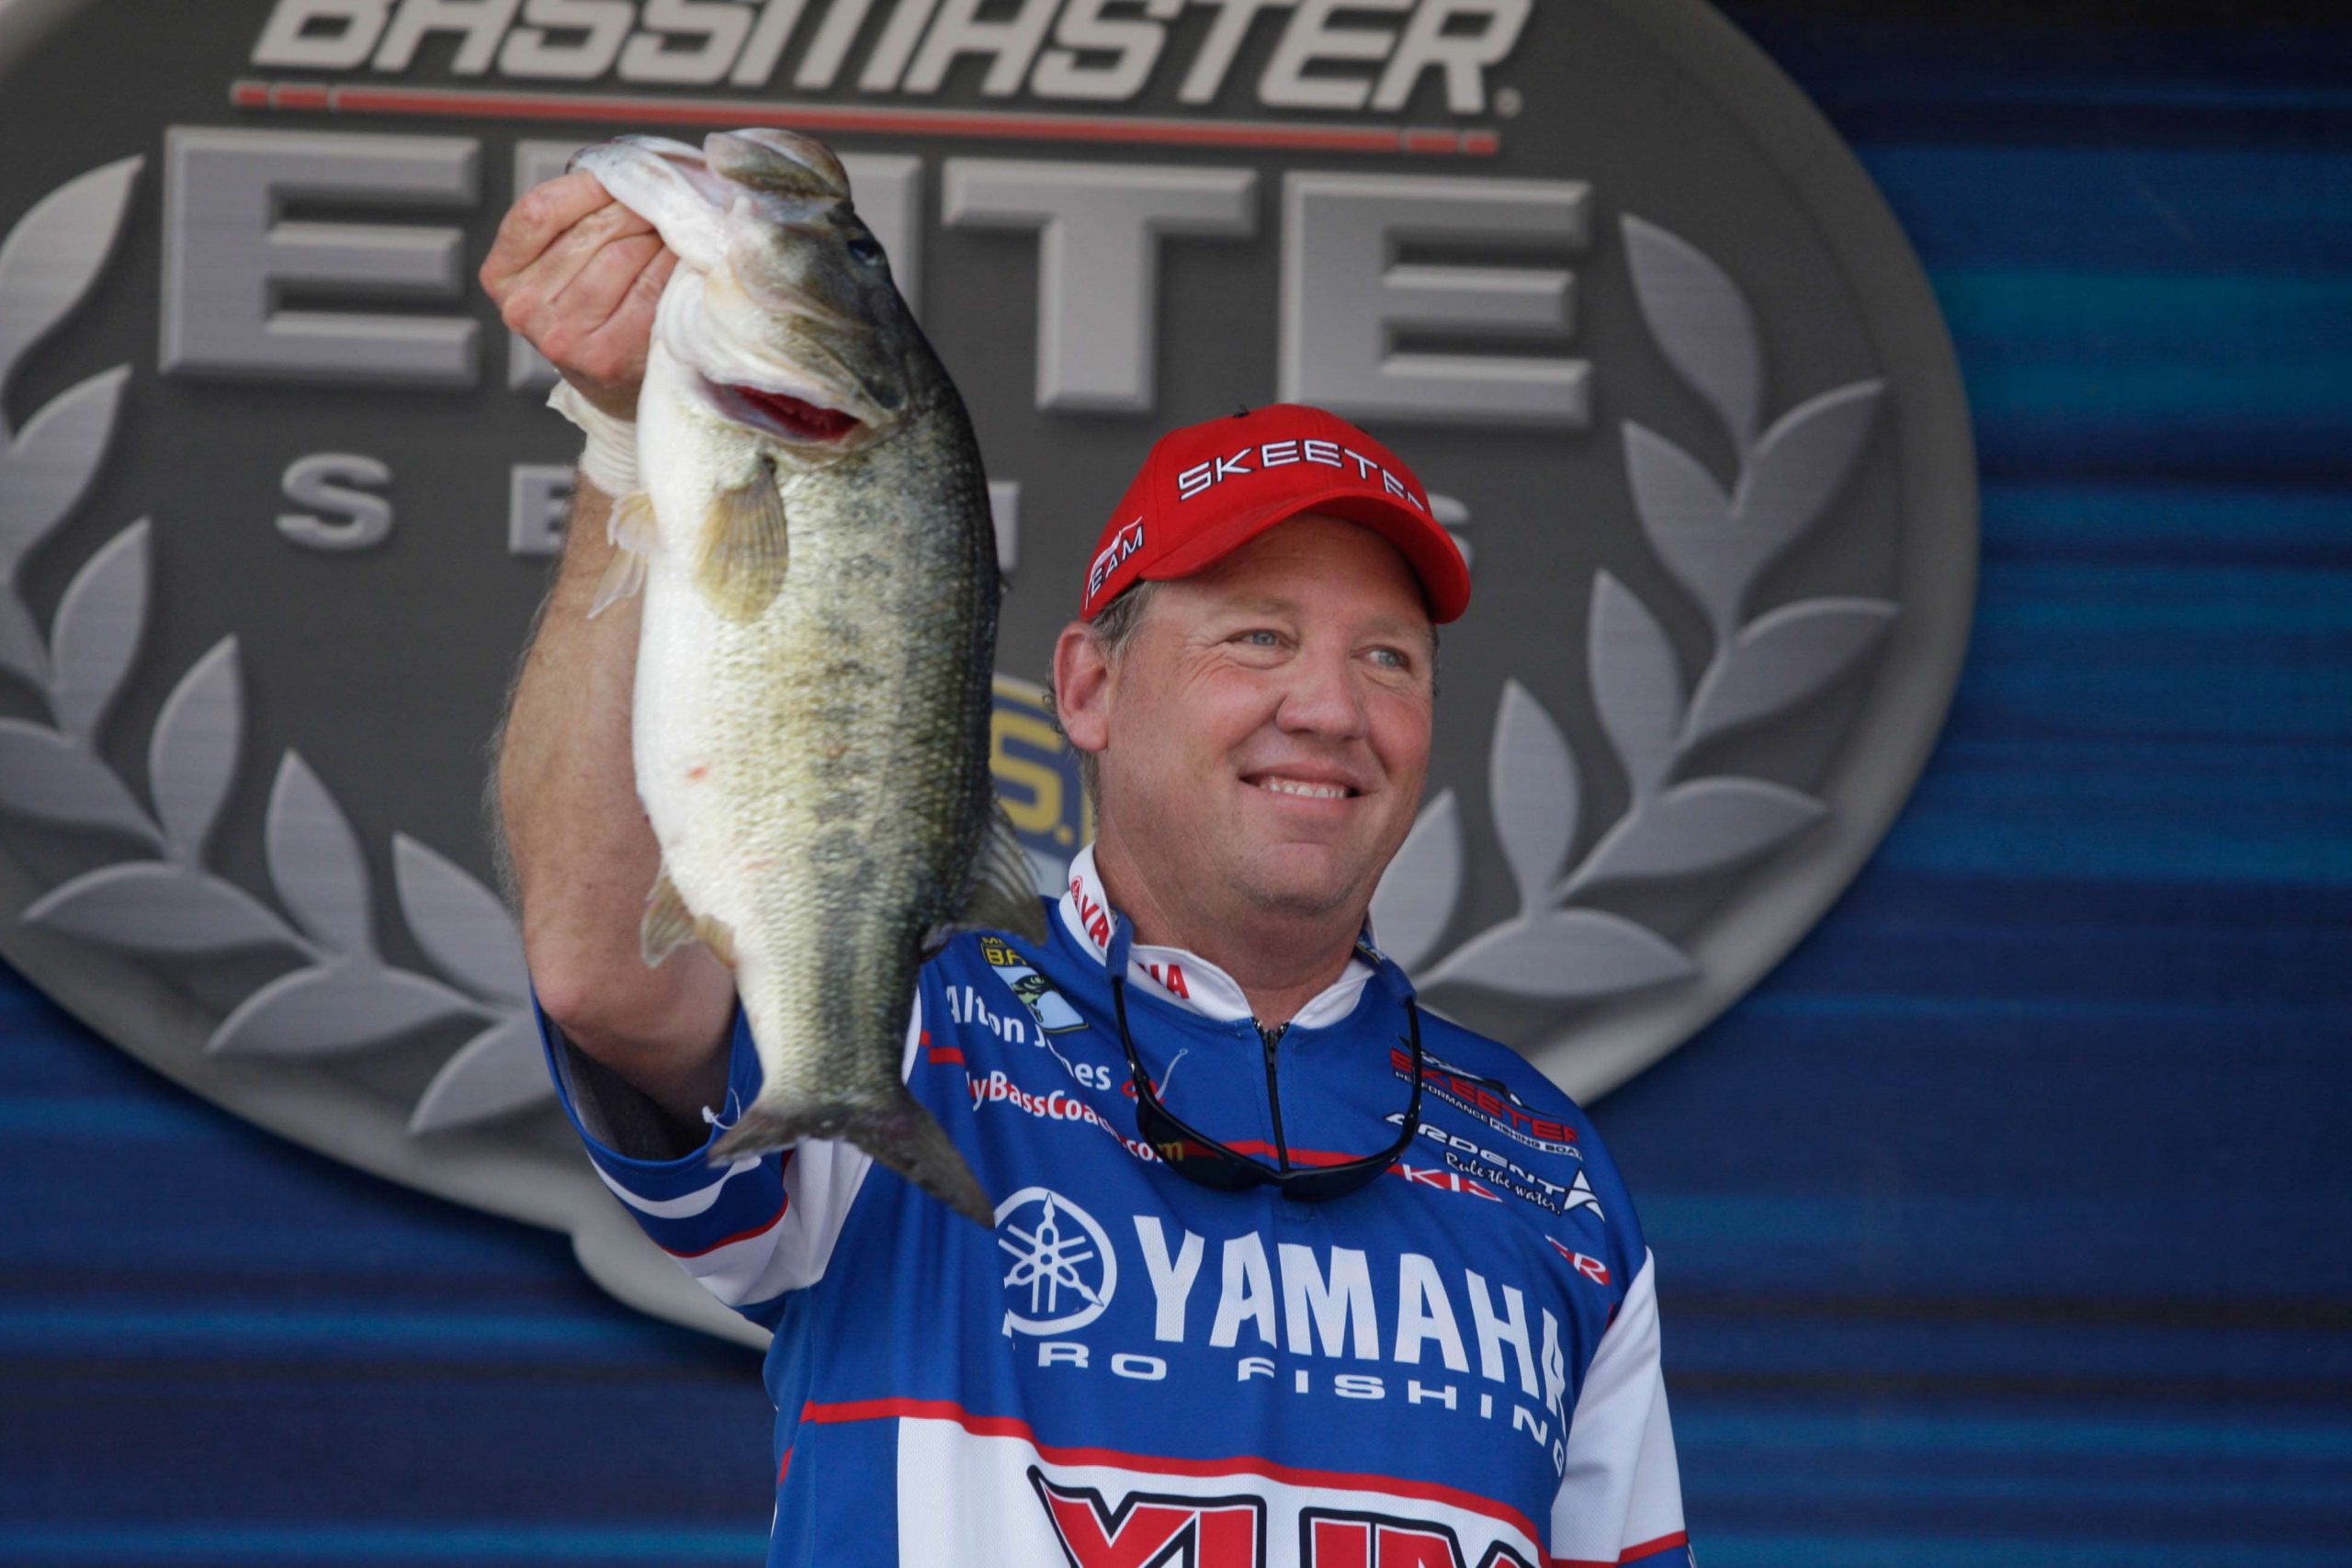 Alton Jones limited every day in the 2009 event, fishing a lipless crankbait along a 200-yard grassbed on the edge of the main river channel. He caught more than 89 pounds there over the four days, ending in 12th place.